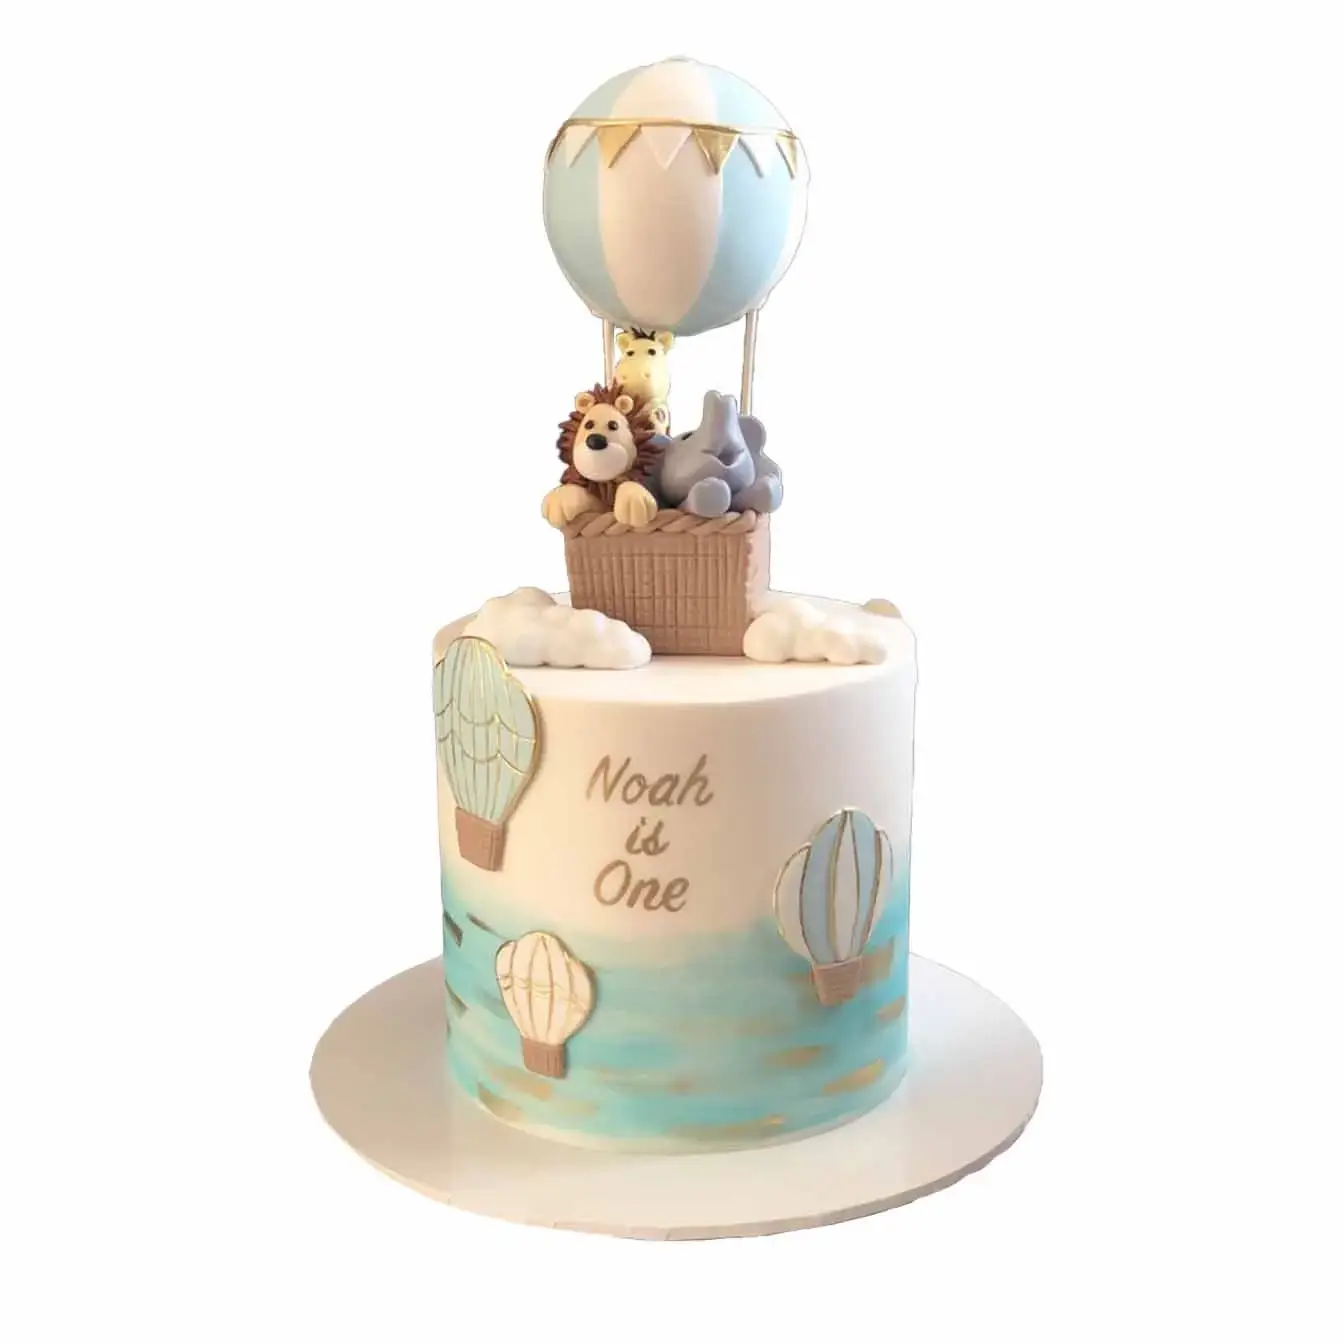 Whimsical Hot Air Balloon Adventure Cake - Double-height fondant-iced cake airbrushed with light blue ombre and adorned with gold accents and cutout hot air balloons, featuring adorable baby animals inside the balloons, an enchanting choice for any celebration.